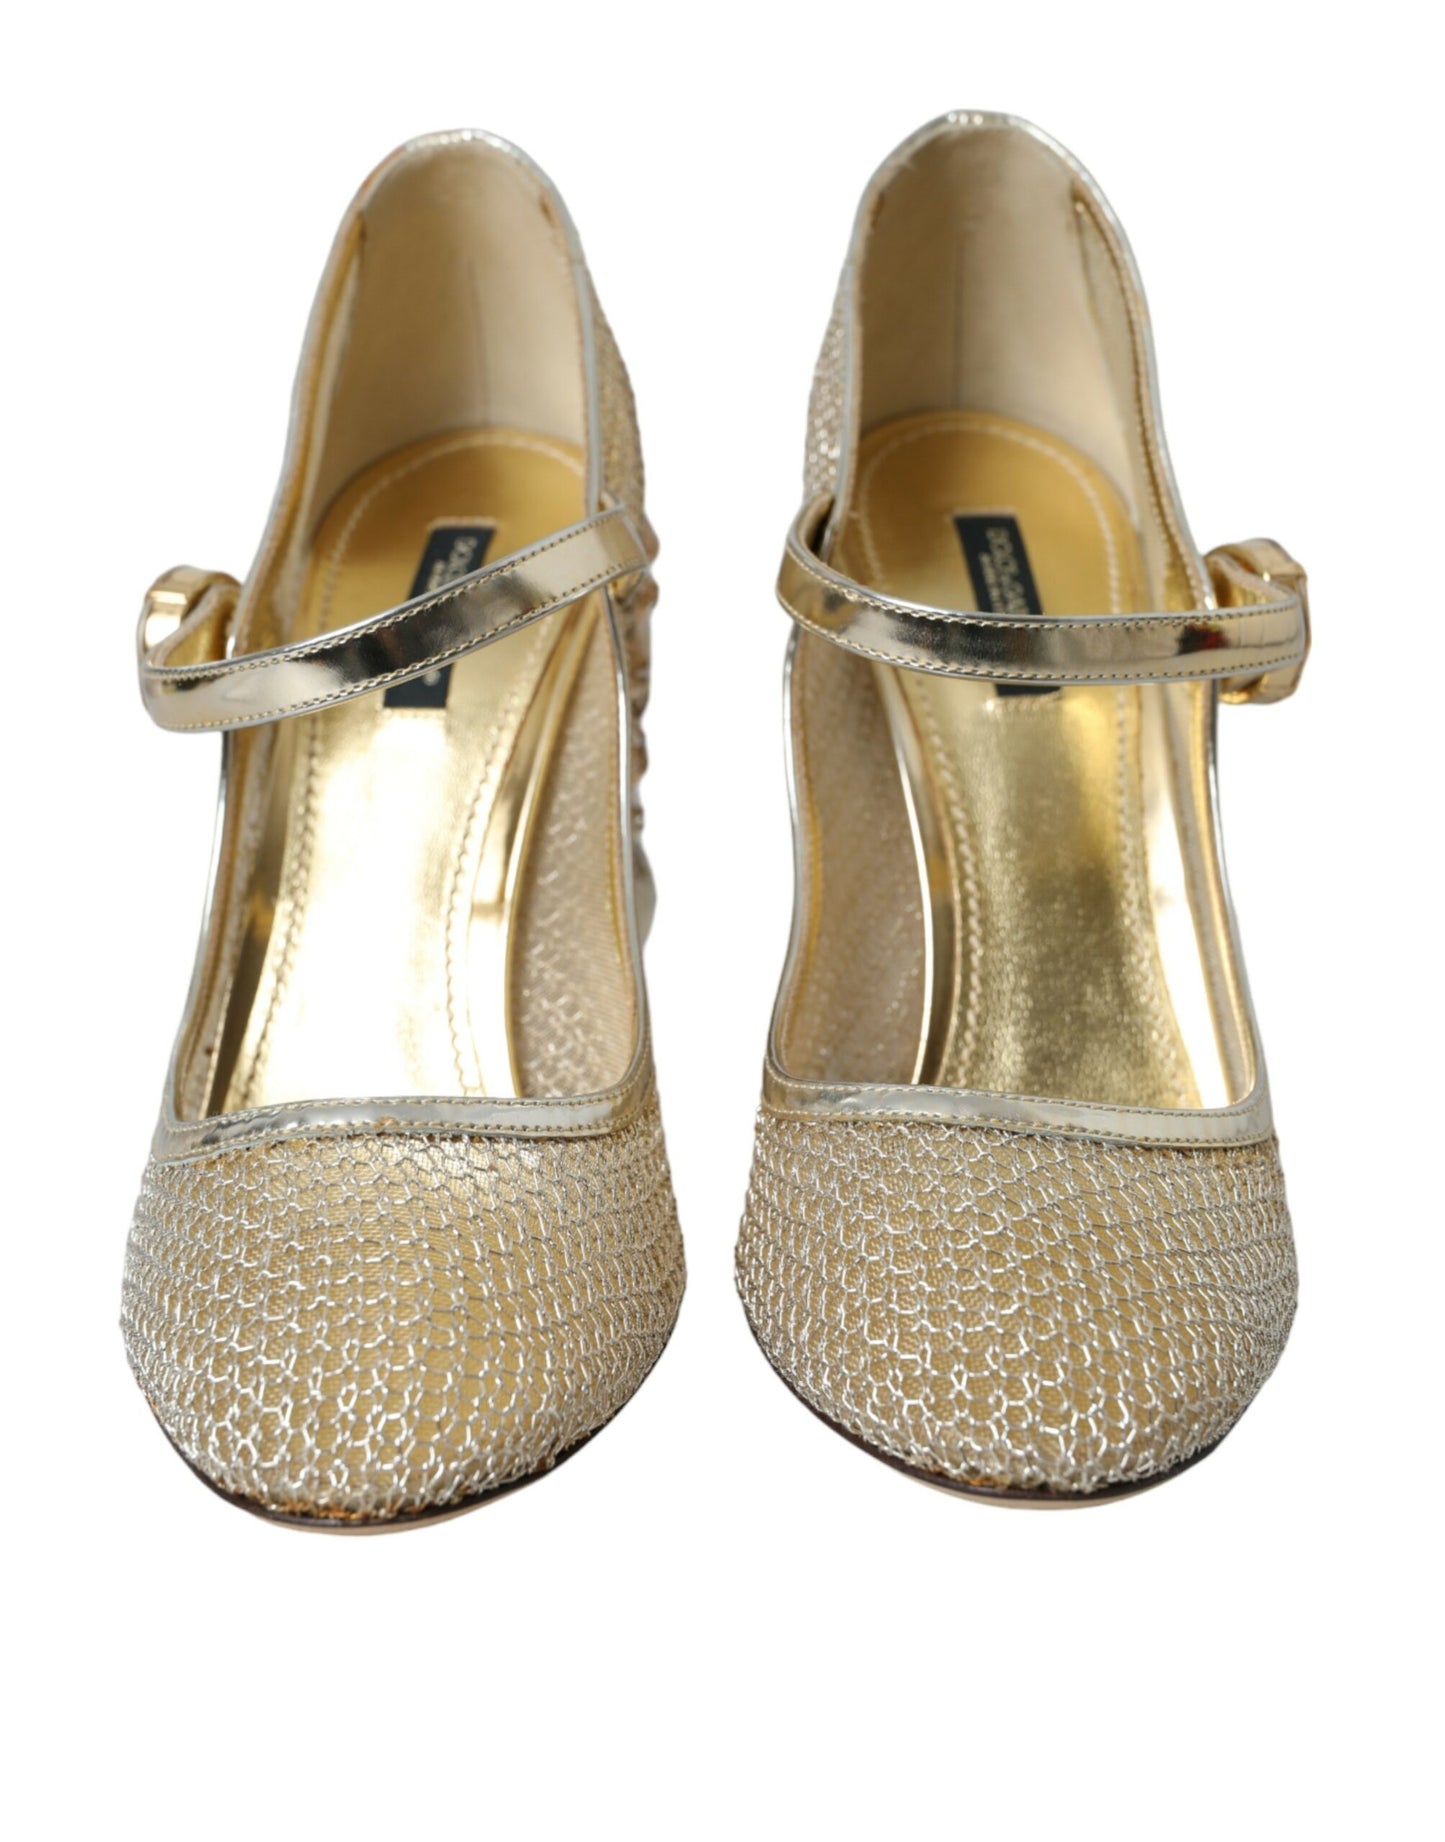 Dolce & Gabbana Gold Mesh Crystal Mary Jane Pumps Heels Shoes